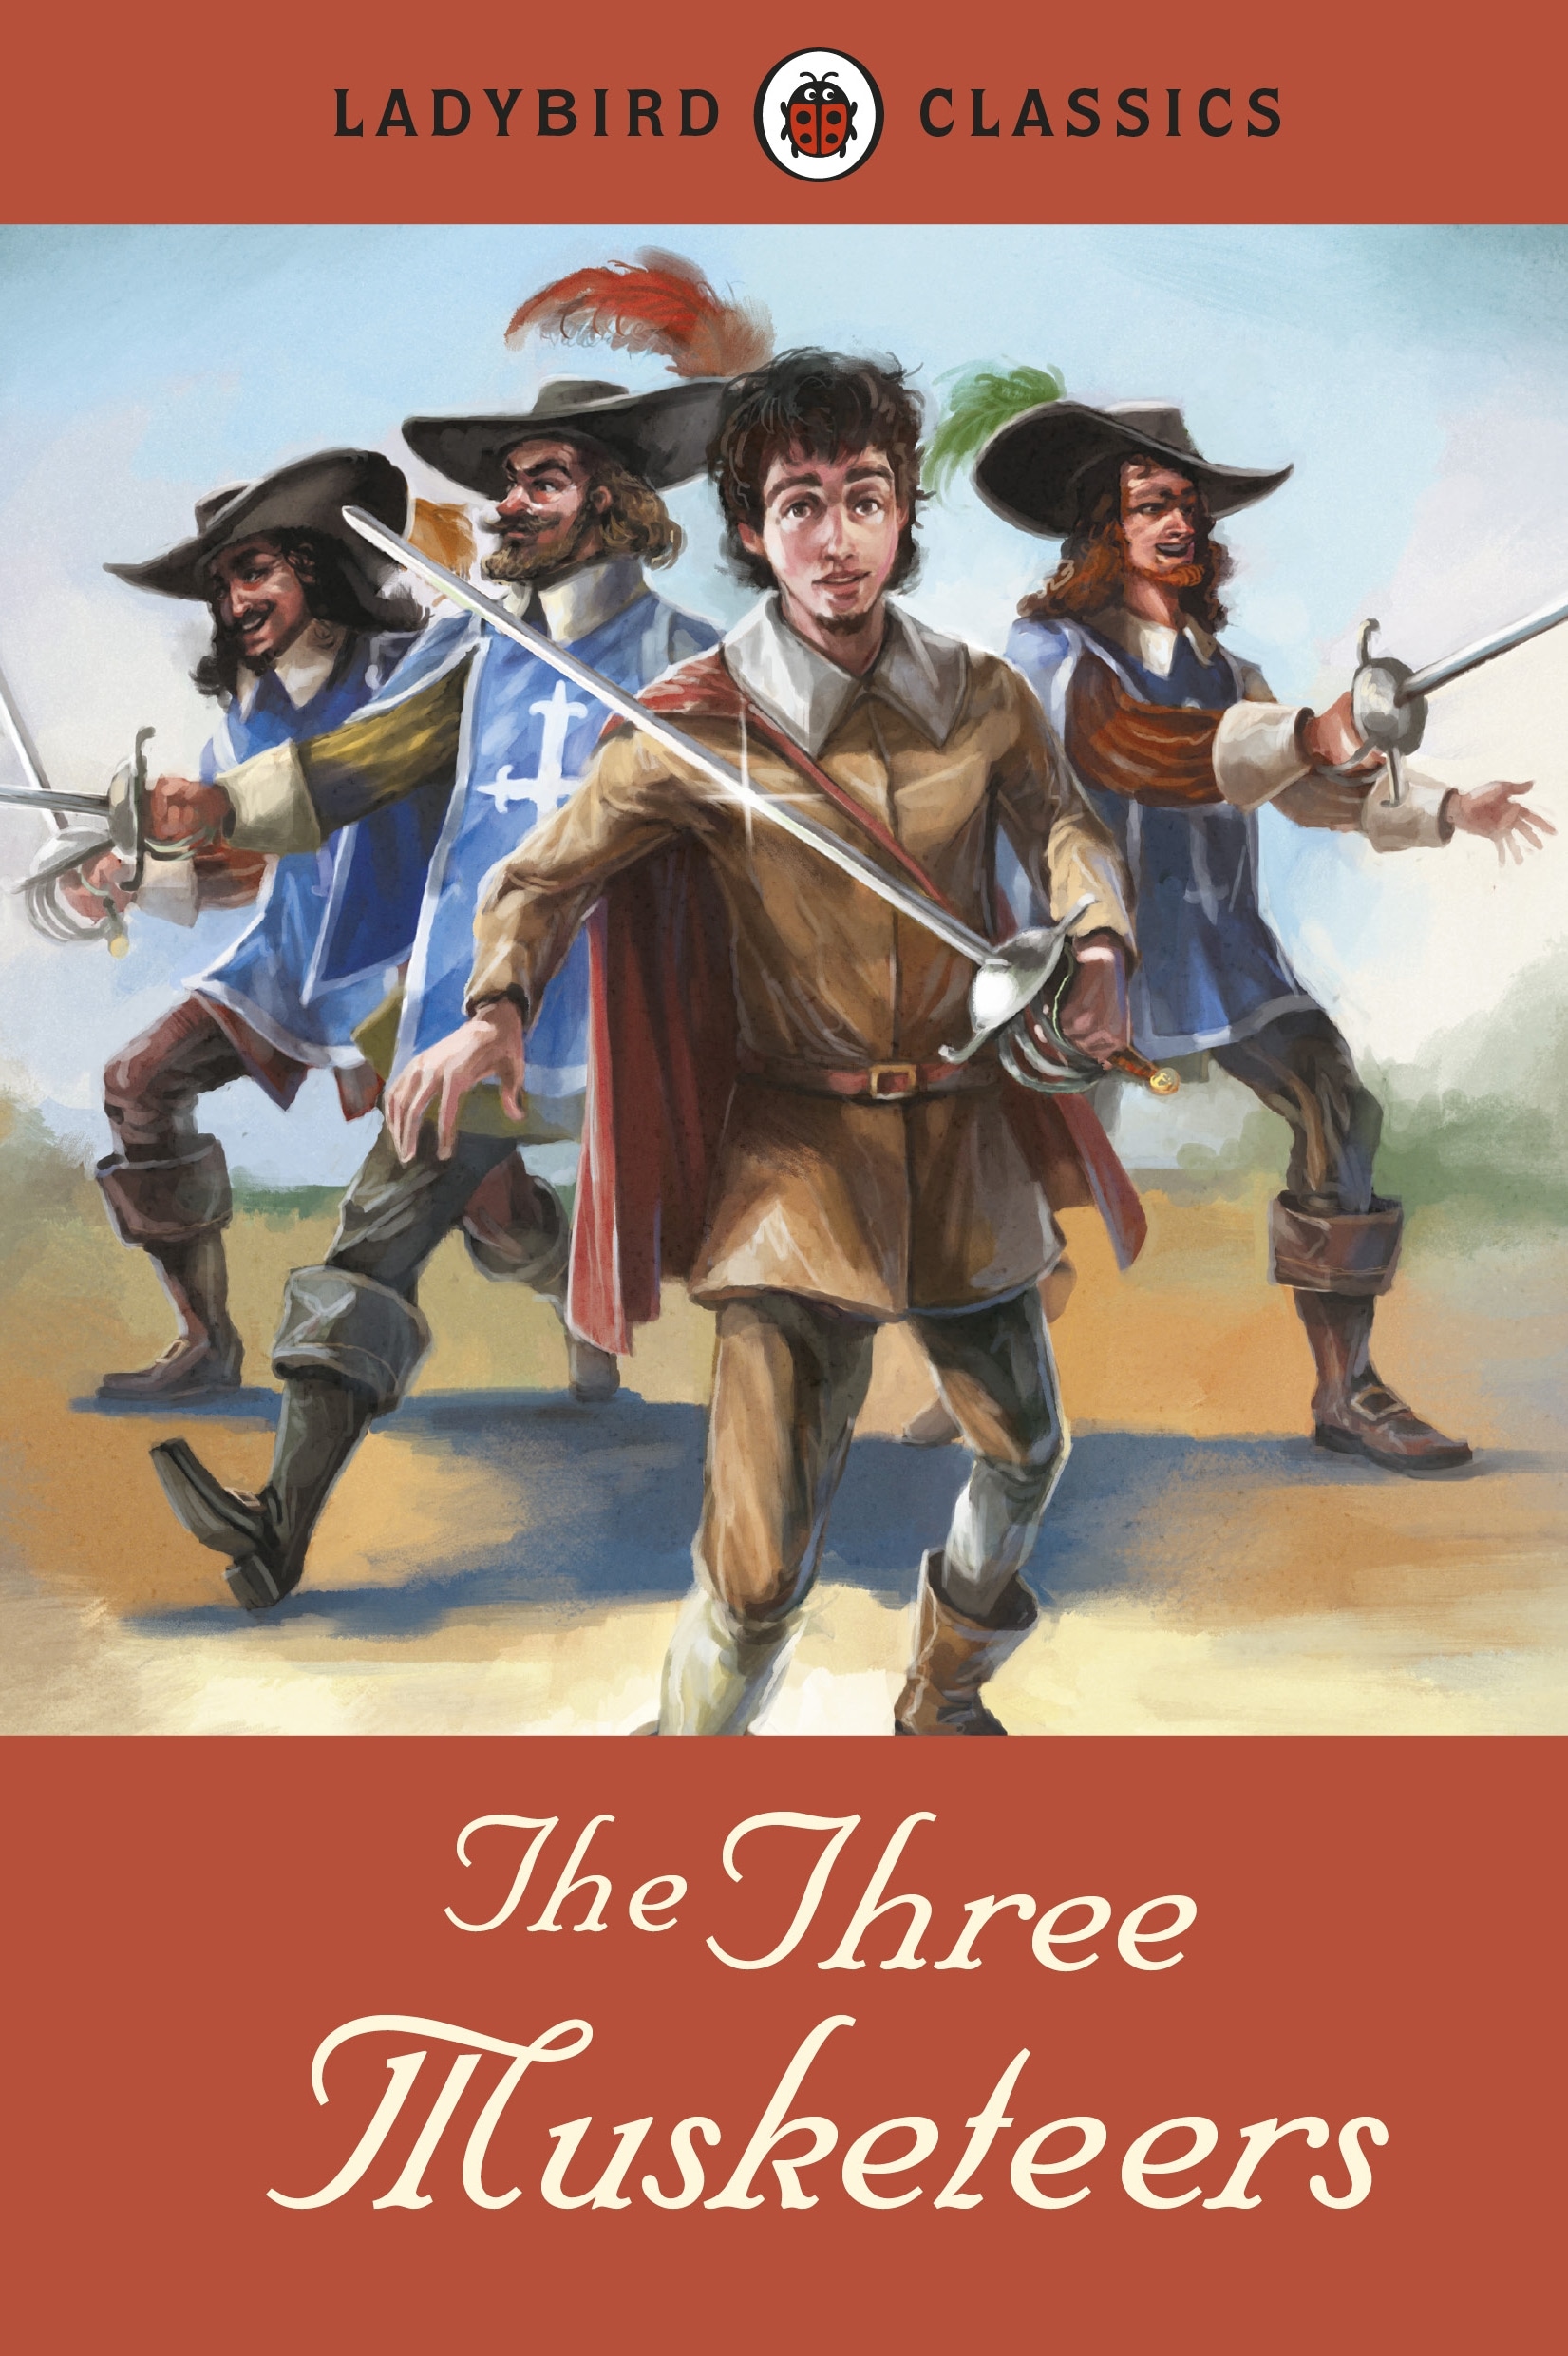 Book “Ladybird Classics: The Three Musketeers” by Alexandre Dumas — April 4, 2013